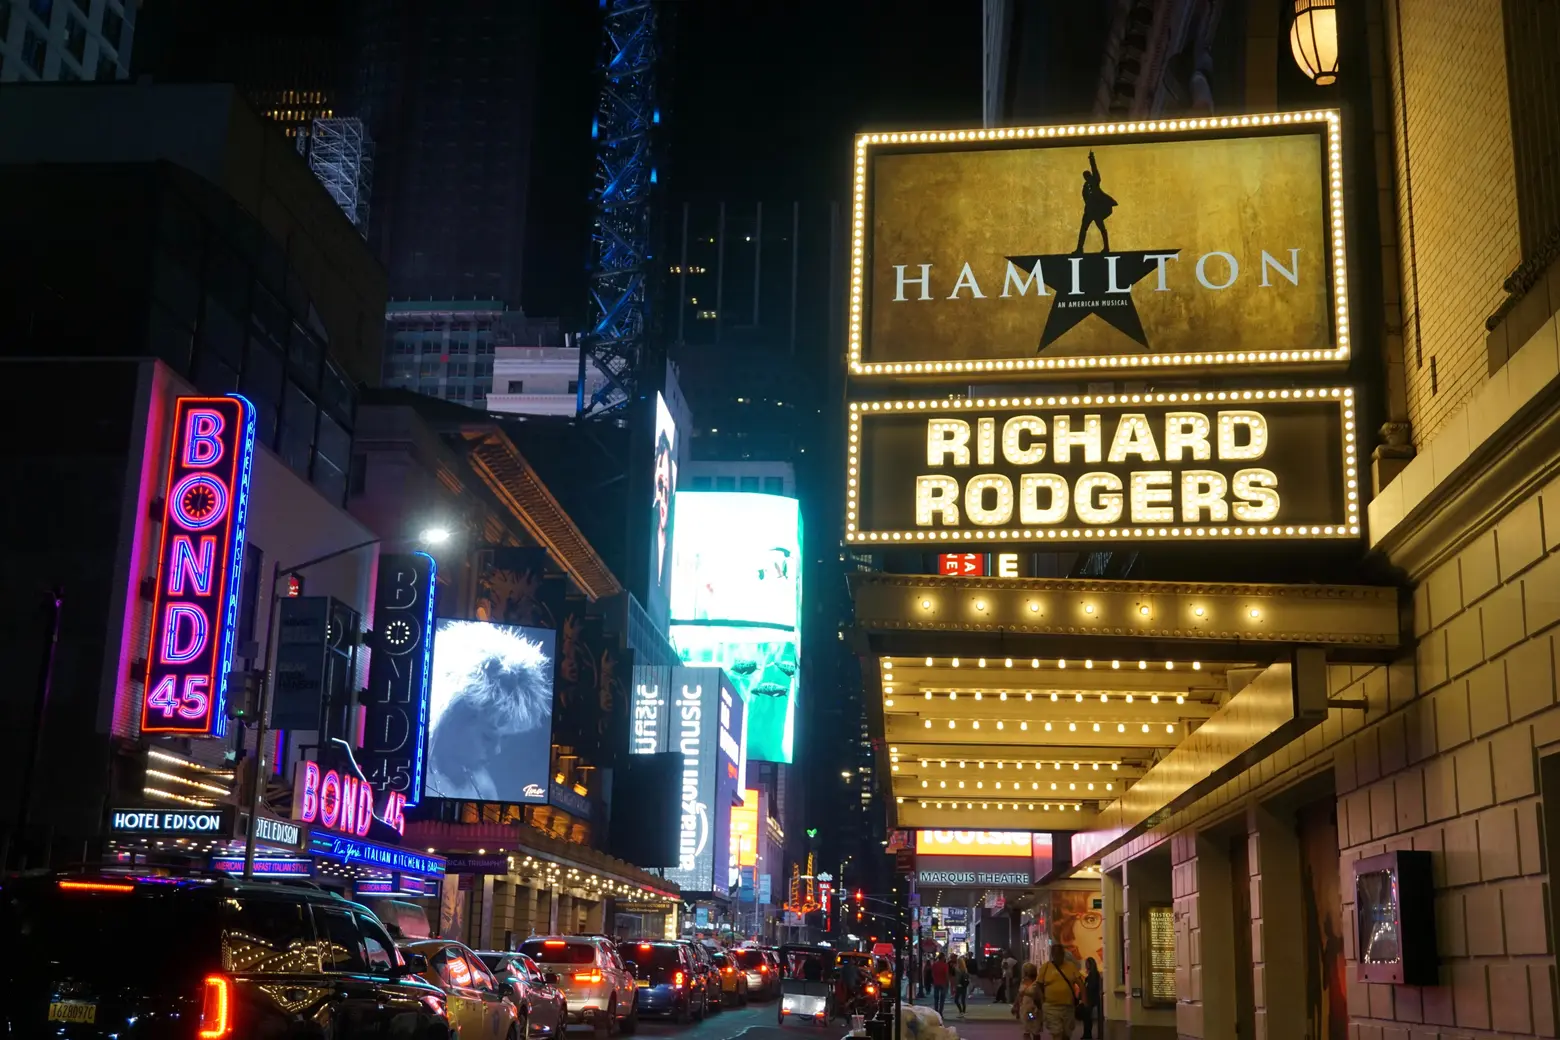 NYC’s 41 Broadway theaters will stay closed through June